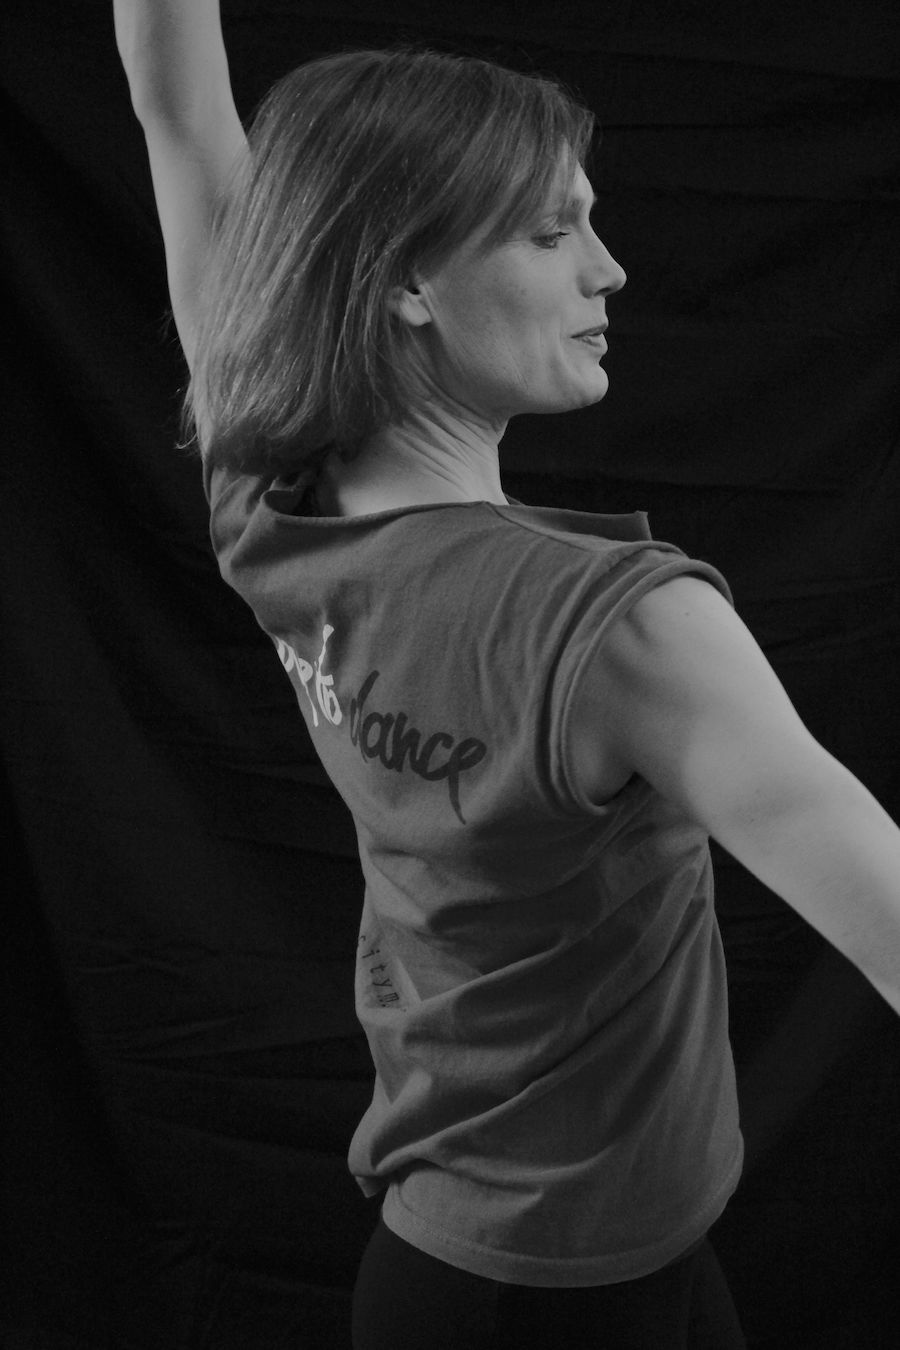 Ruth Kent is a Scottish choreographer and dancer, based in the North-East Of Scotland.  Ruth trained in Community Dance Studies at Laban Centre London and has worked extensively with groups of all ages and abilities for the past fifteen years. Ruth has danced for choreographers Sara Schena, Ruby a Worth and Mhairi Allan and performed in Residencies with Erroll White and Ian Spink. Ruth has created several pieces including children's work, Made to Measure, performed at March Moves, Aberdeen, Duthie Park, Lemon Tree, Aboyne Theatre and Edinburgh Fringe 2014. Ruth has held roles as Cultural Co-Ordinator (Aberdeenshire), Youth Dance Devt Officer and currently as Dance Development Officer at Citymoves Dance Agency. Ruth leads performance groups Quicksilver (mature dancers) and Step Forward (mixed abilities) and performs with them regularly. She is a teacher, facilitator and mentor in inclusive practise. She enjoys collaborating with others to create inspiring projects that connect people through dance and her main aim is to spread the joy of dancing!